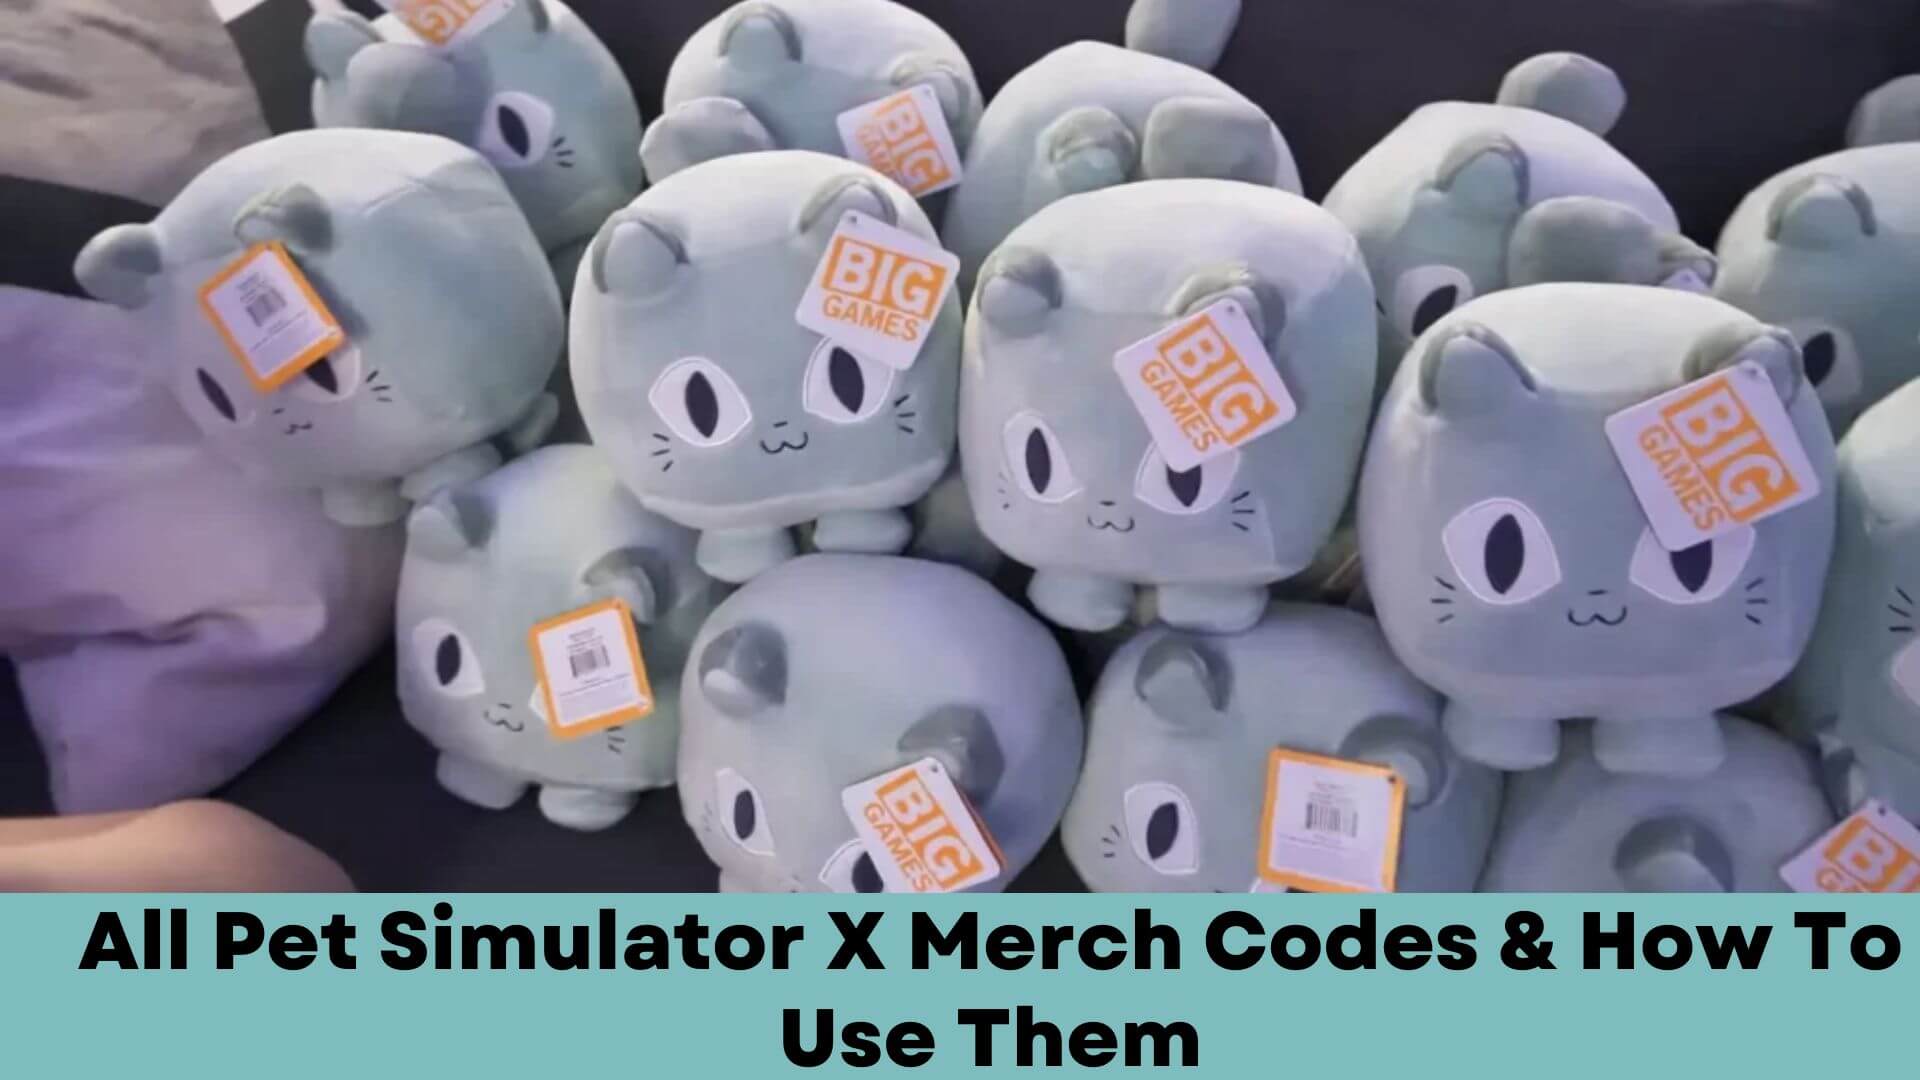 new-pet-simulator-x-plushies-with-in-game-codes-coming-soon-march-2022-pro-game-guides